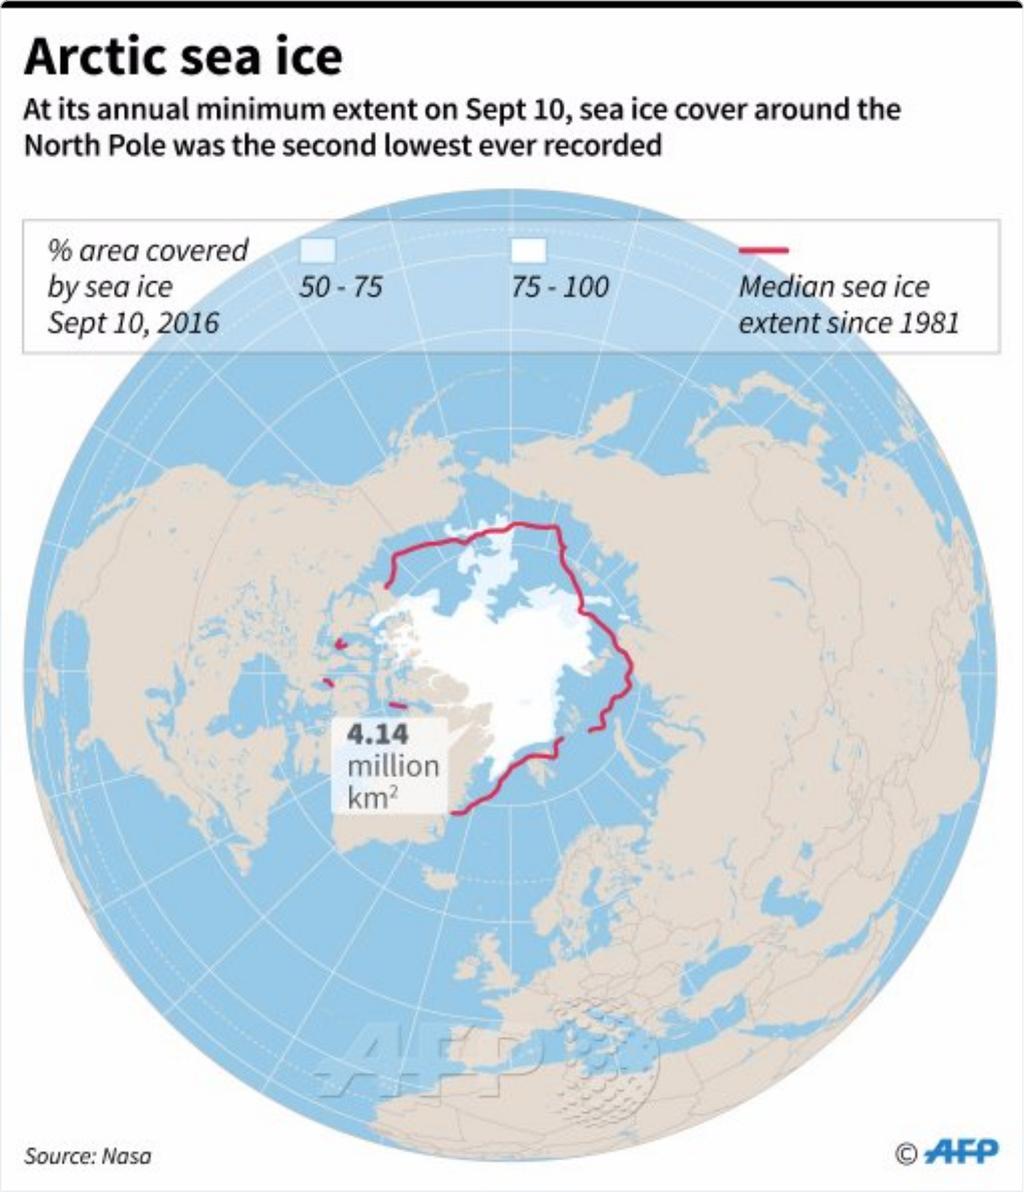 3 van 11 26-11-2016 07:16 AFP news agency @AFP Volgen Alarmed scientists say freakishly high temps in the Arctic are reinforced by a "vicious circle" of climate change u.afp.